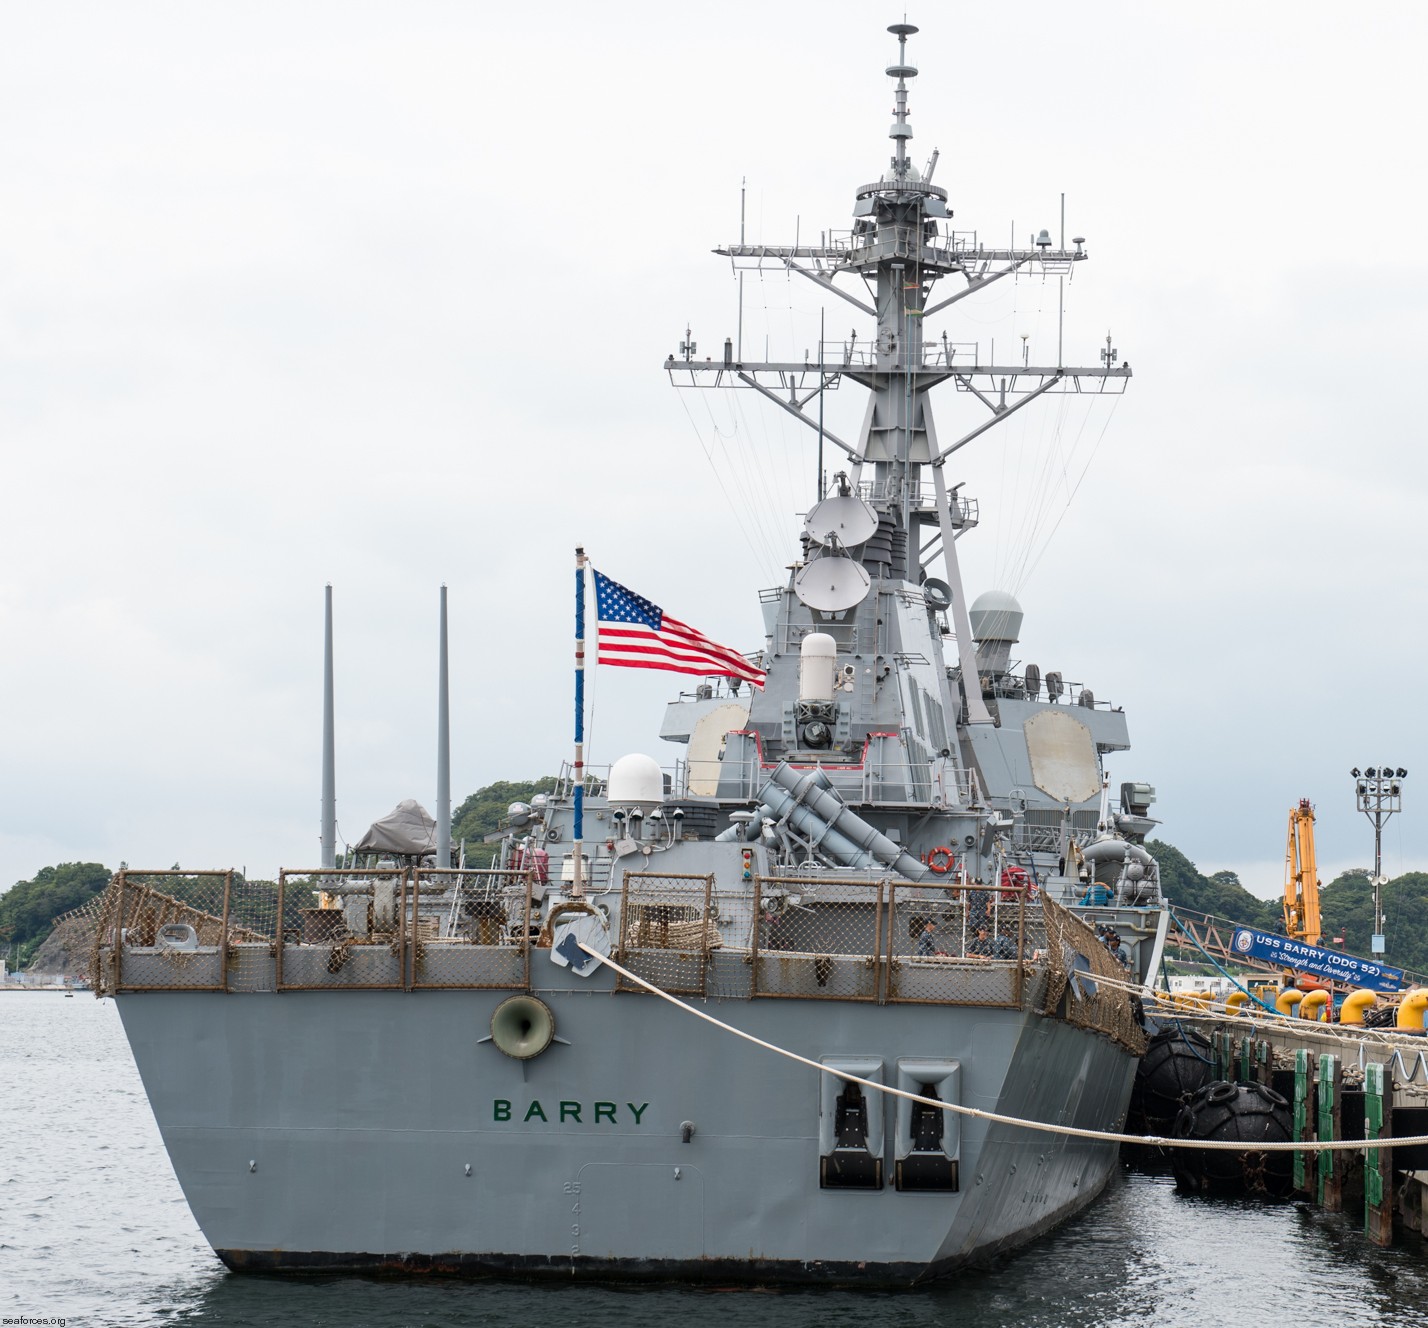 ddg-52 uss barry arleigh burke class guided missile destroyer us navy 110